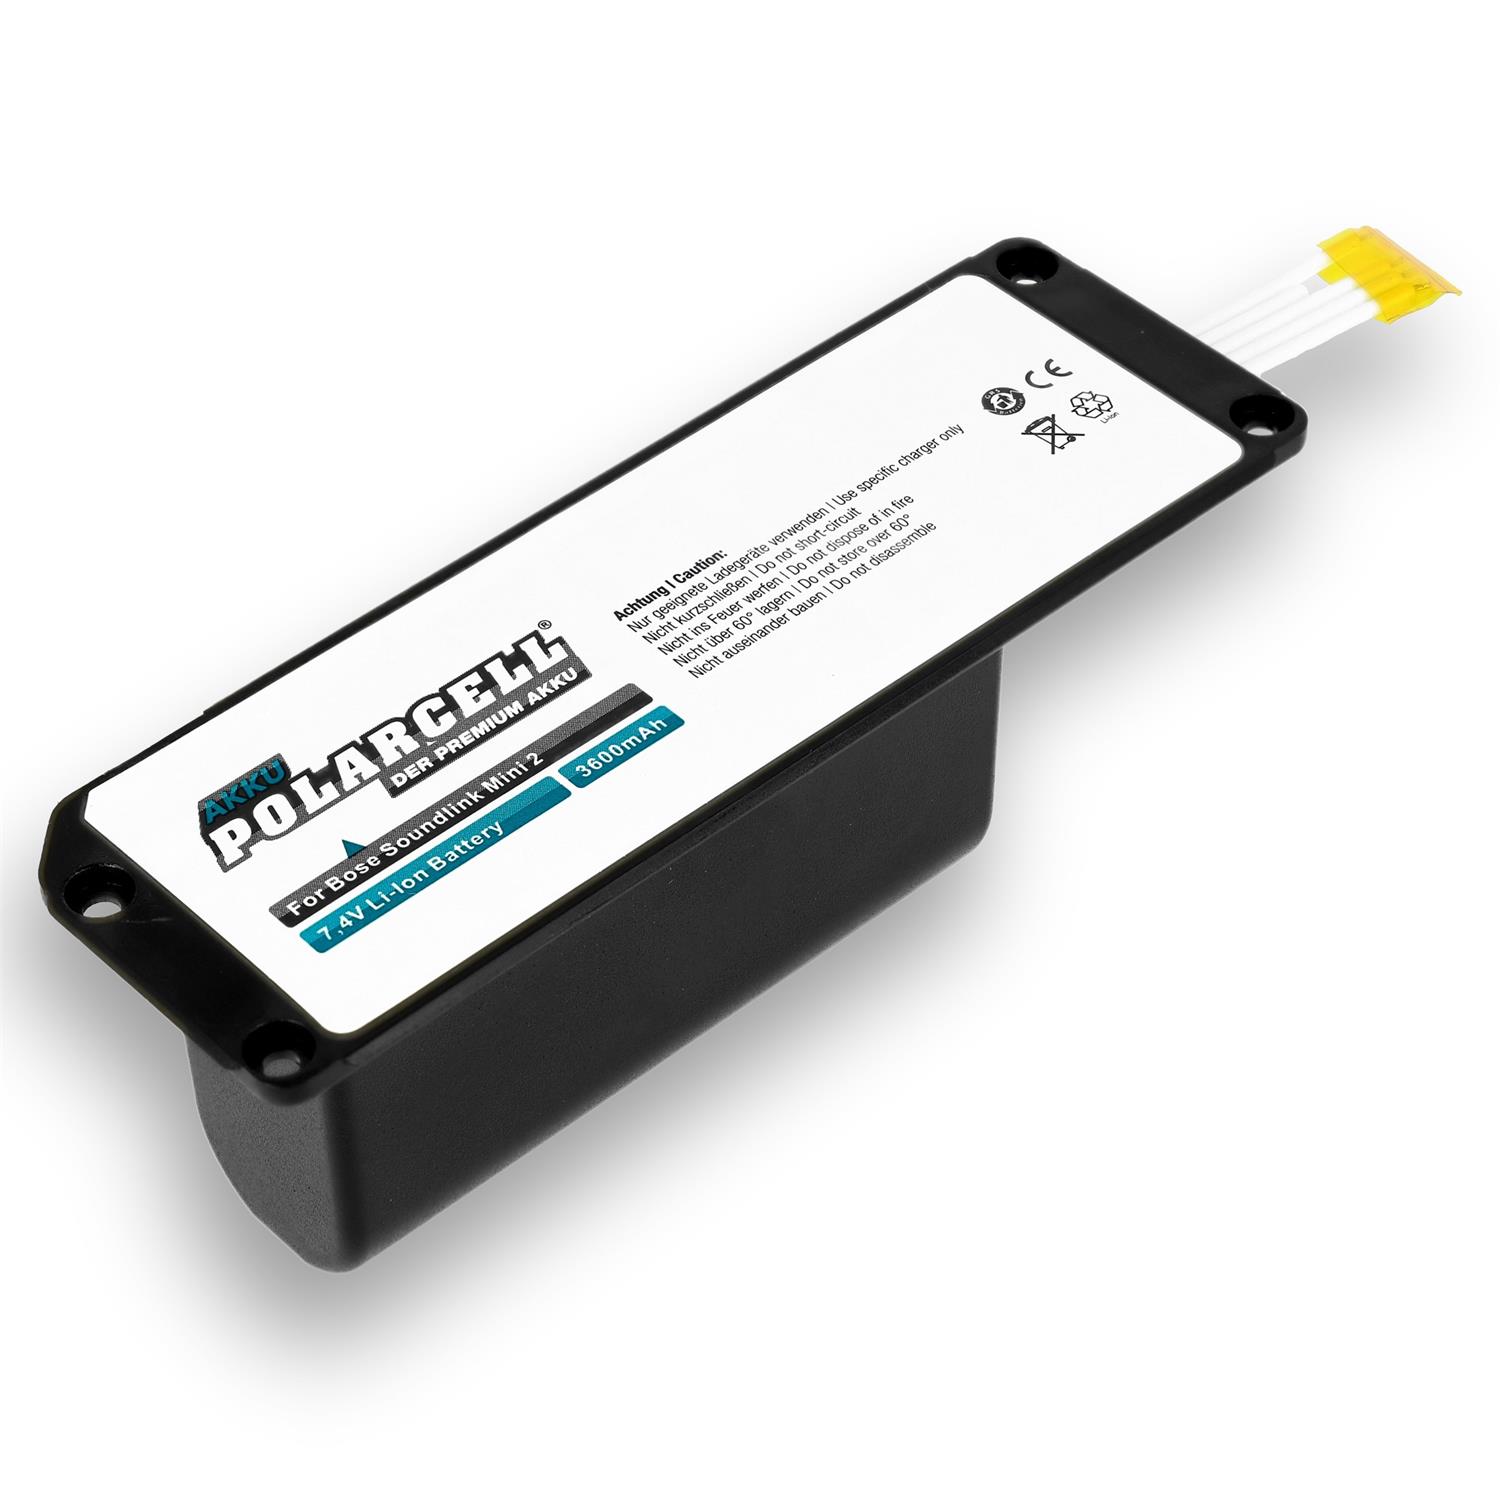 PolarCell Battery for Bose Soundlink Mini 2 with 3600mAh - buy now!